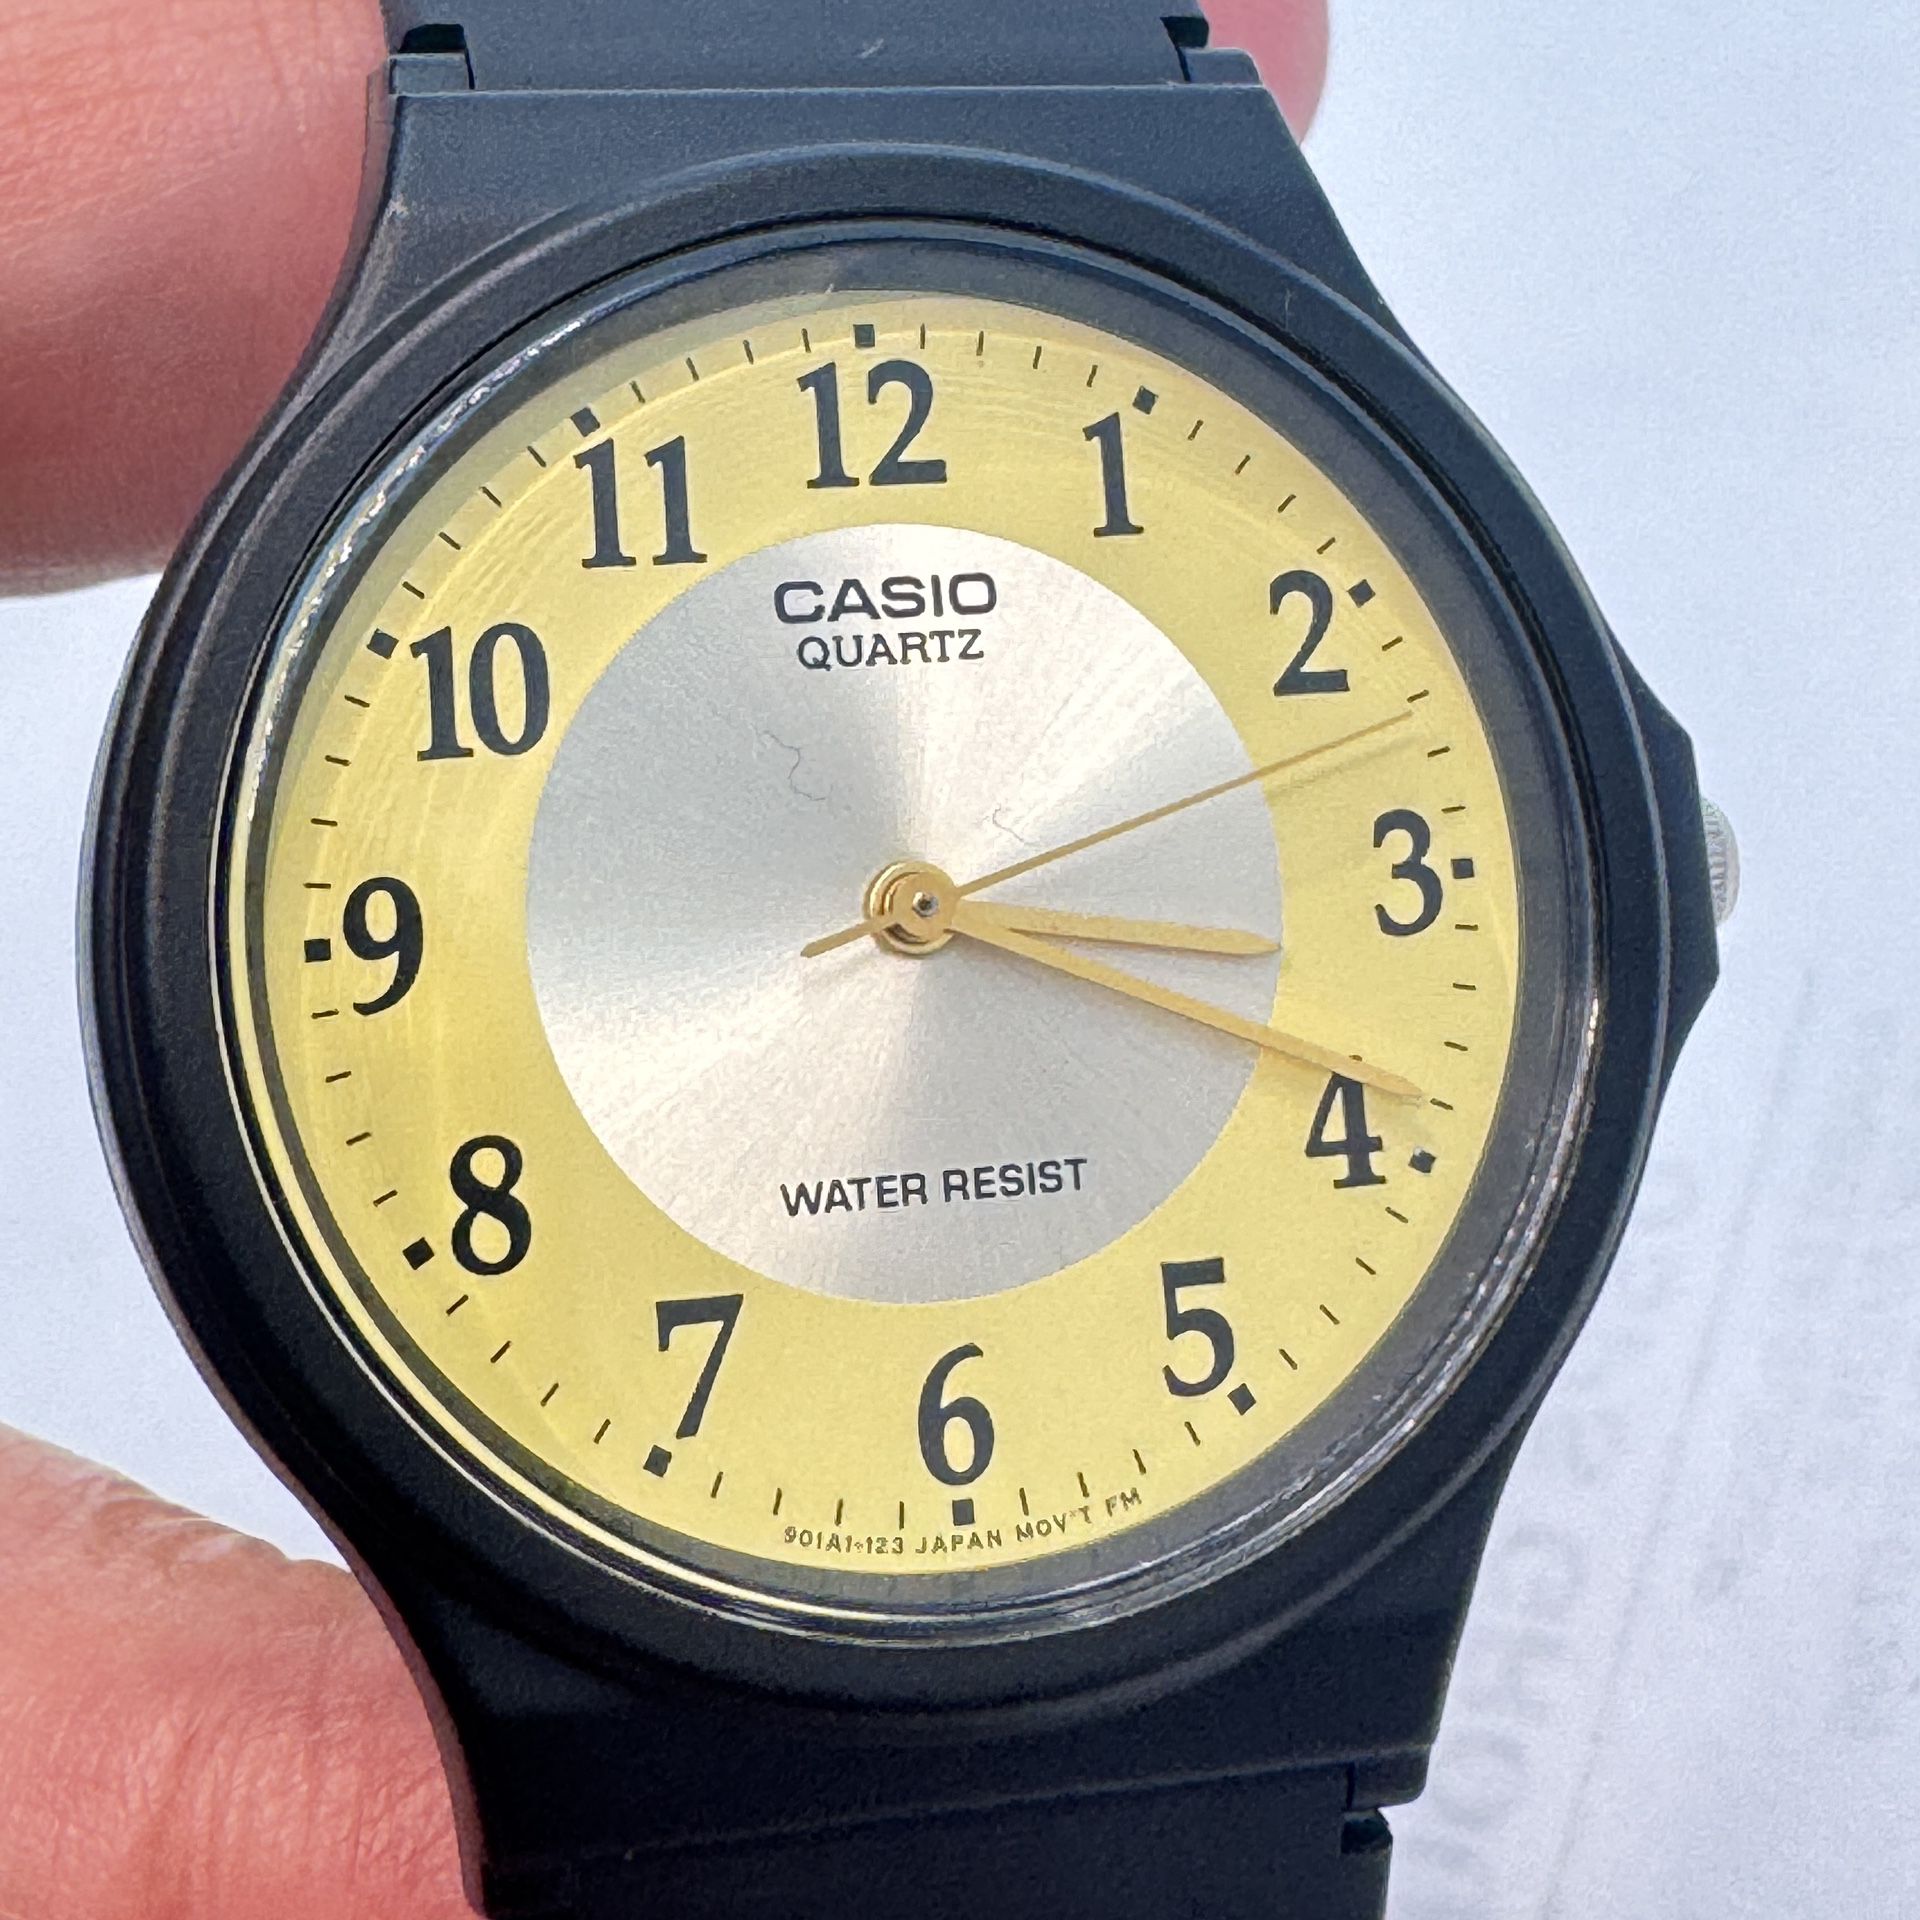 Casio  Watch   Unisex  Size  34mm Diameter  Watch for Men /Ladies or for Teen  New Battery Inside  8 inches Long  Band Adjustable  Lightweight In Your